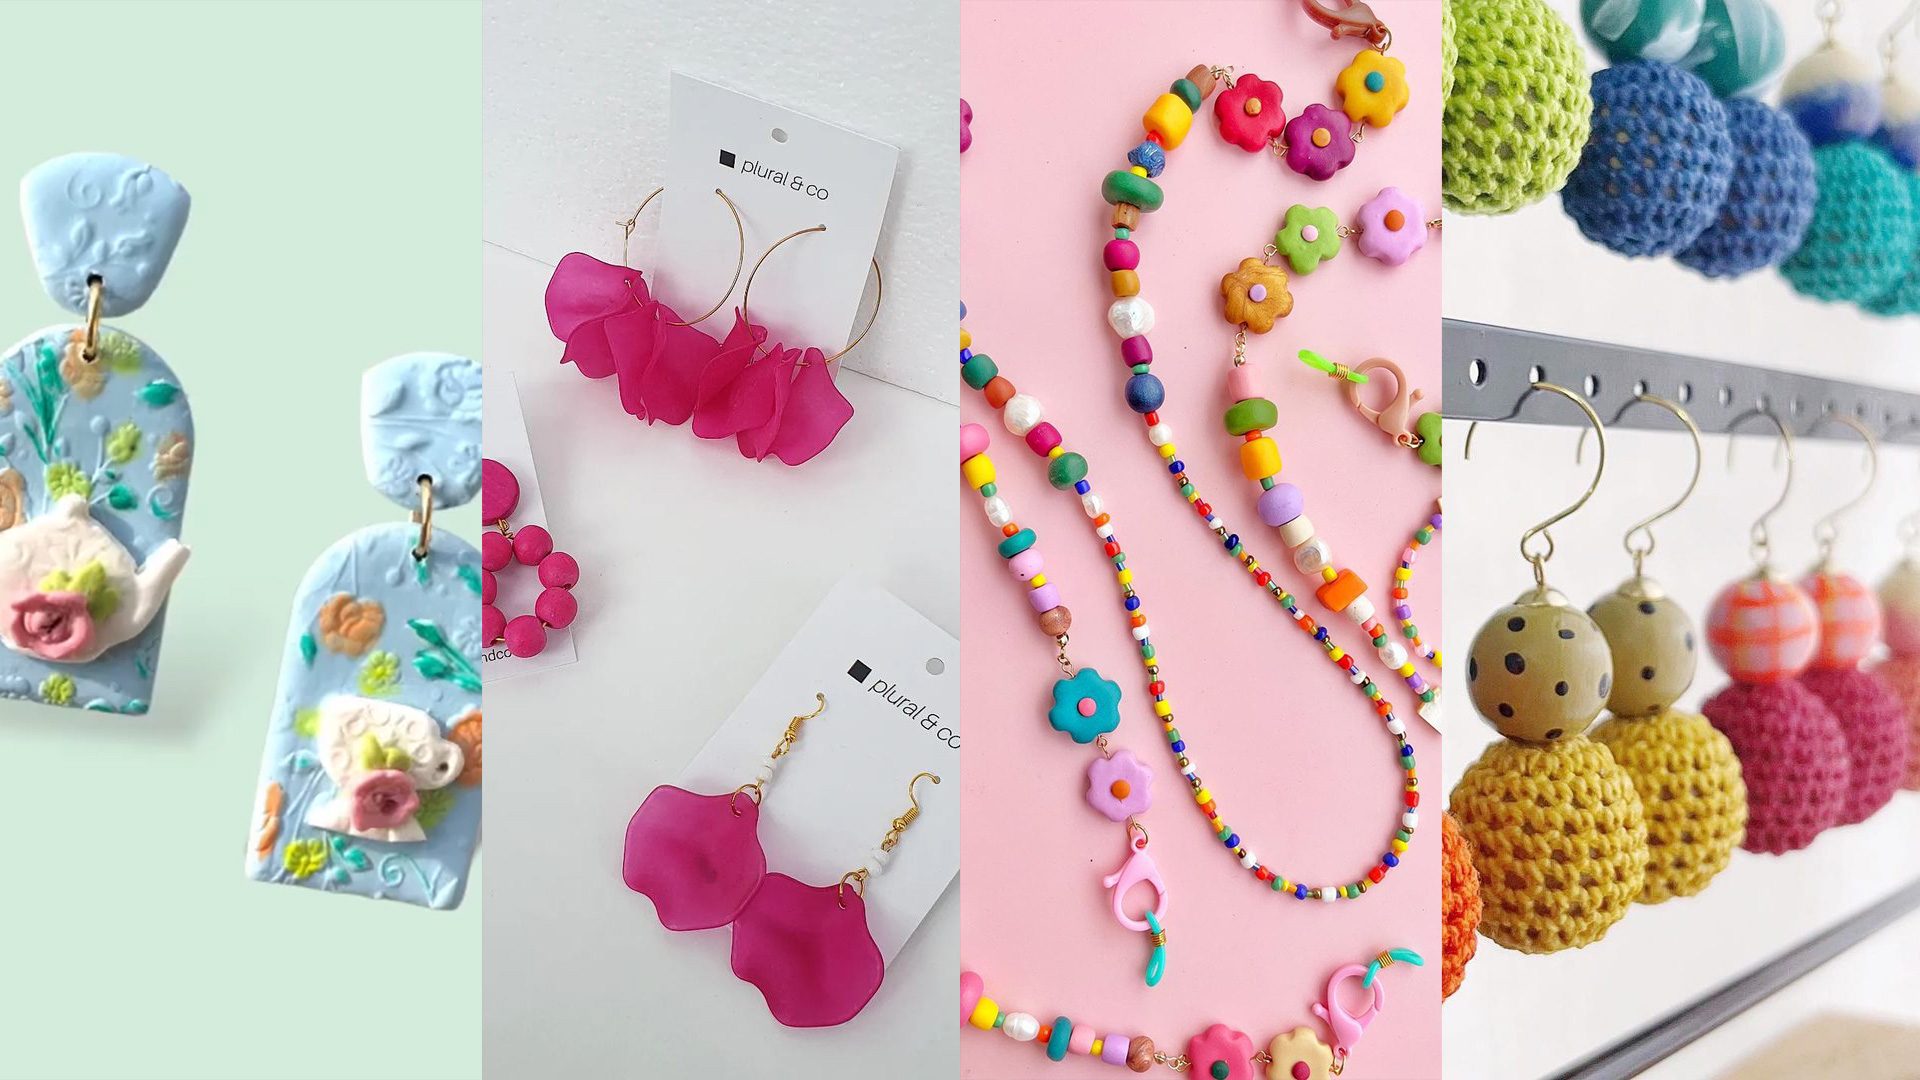 LIST: Fun earrings, necklaces from local shops perfect for summer OOTDs